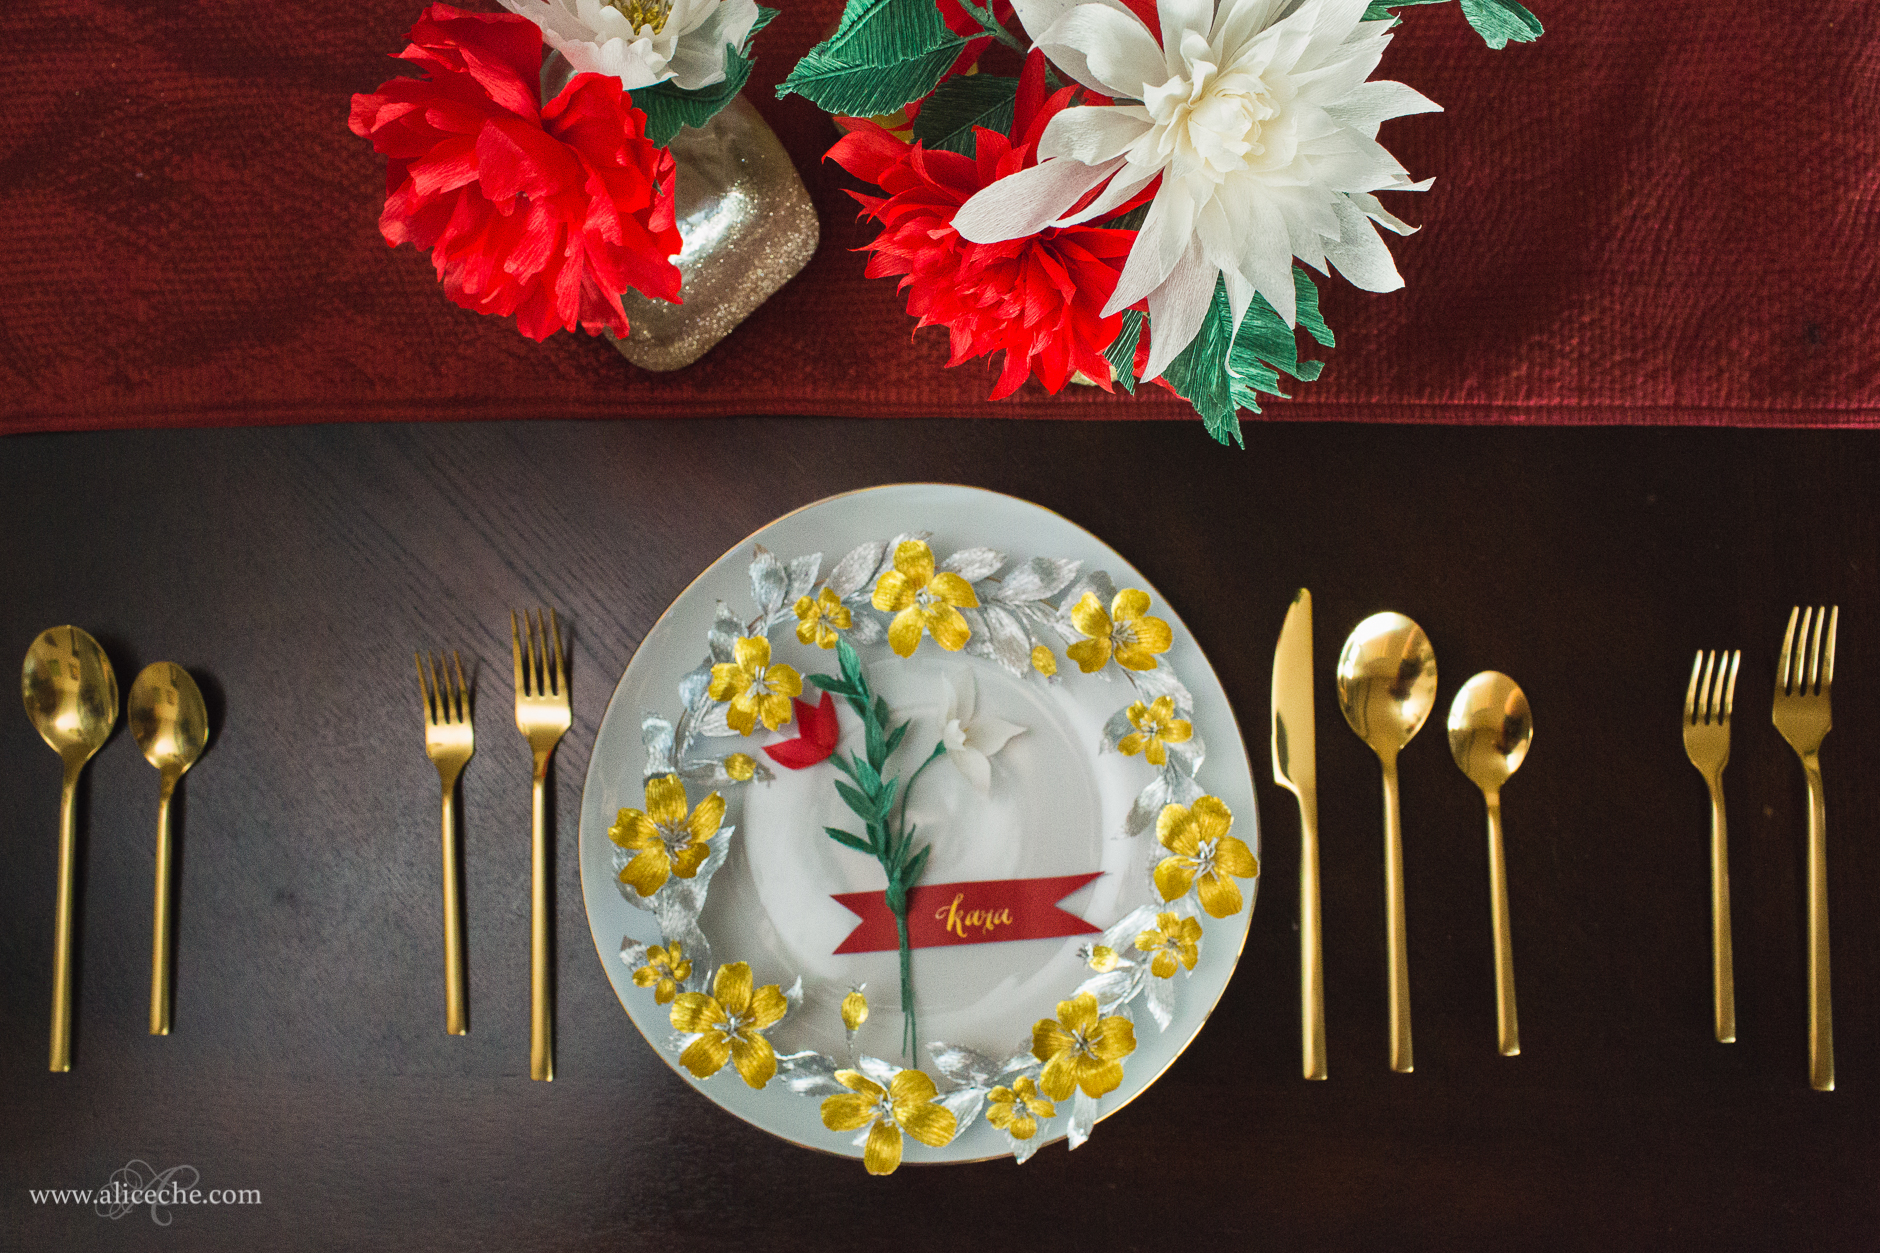 alice-che-photography-christmas-wedding-place-setting-gold-cutlery